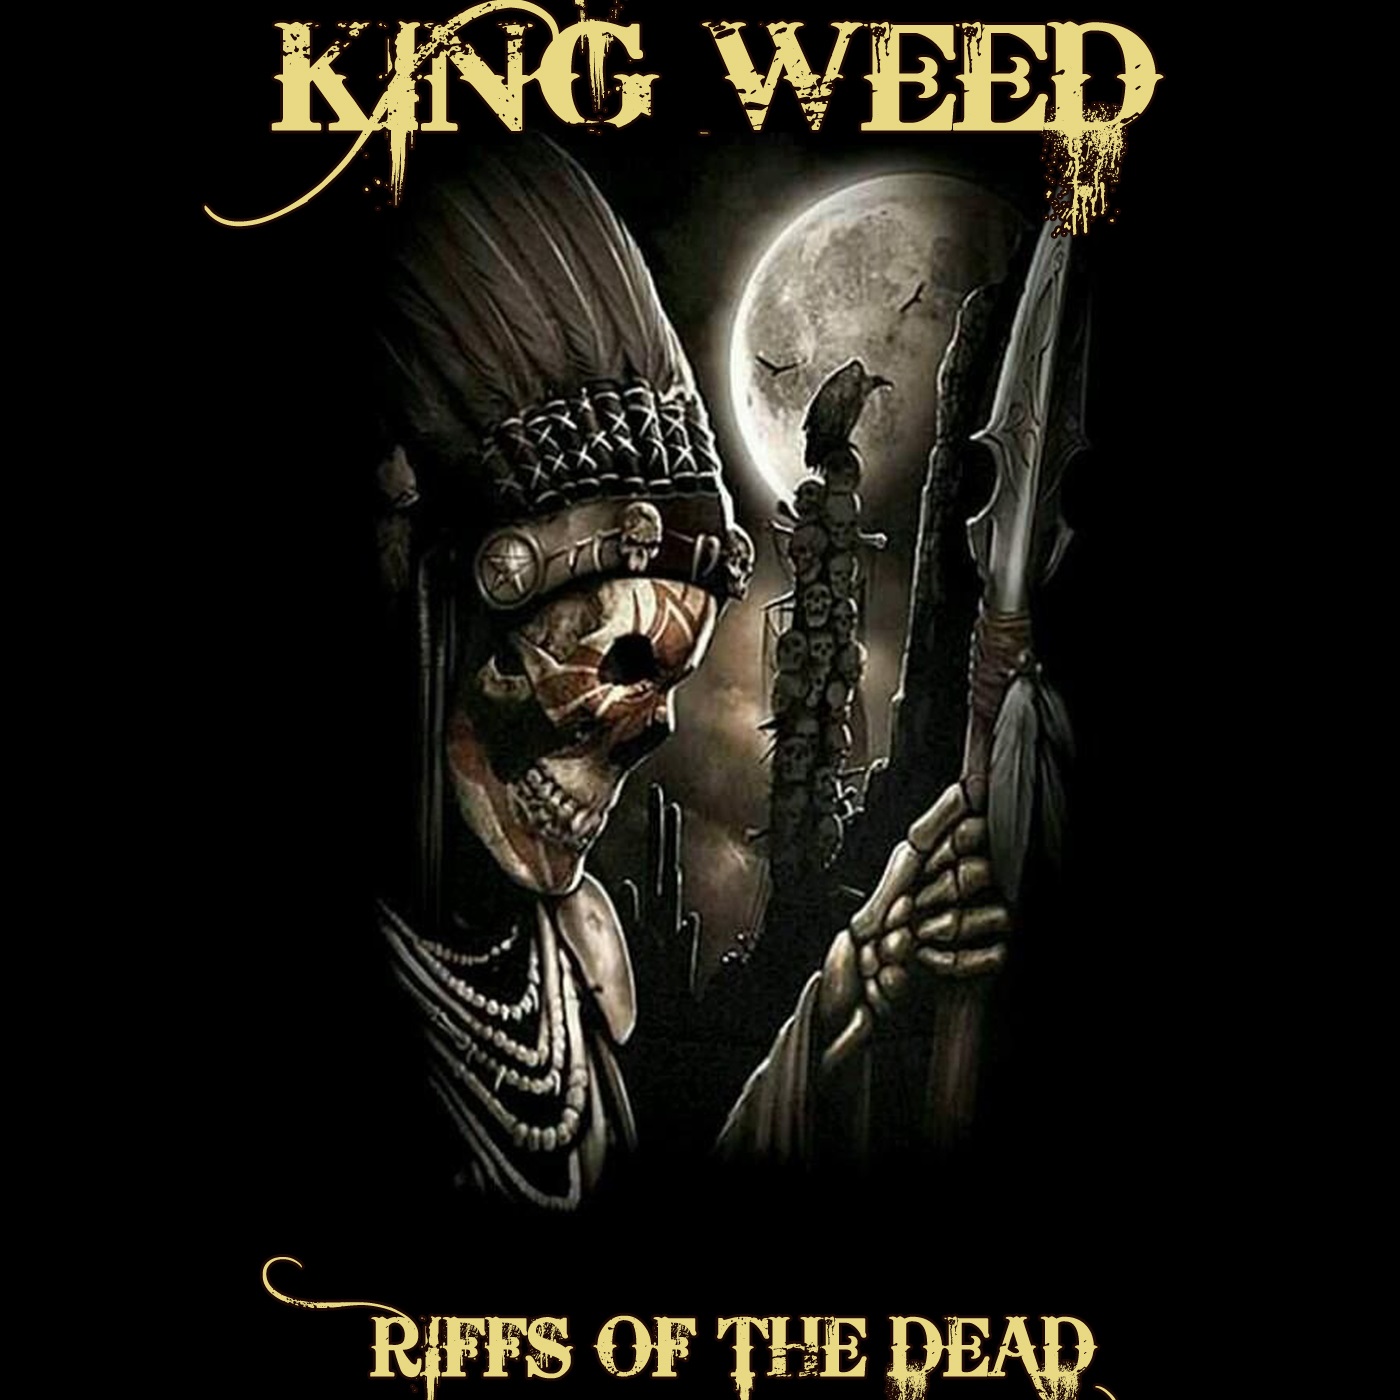 King Weed - RIFFS OF THE DEAD (2020) [FLAC 24bit/44,1kHz]